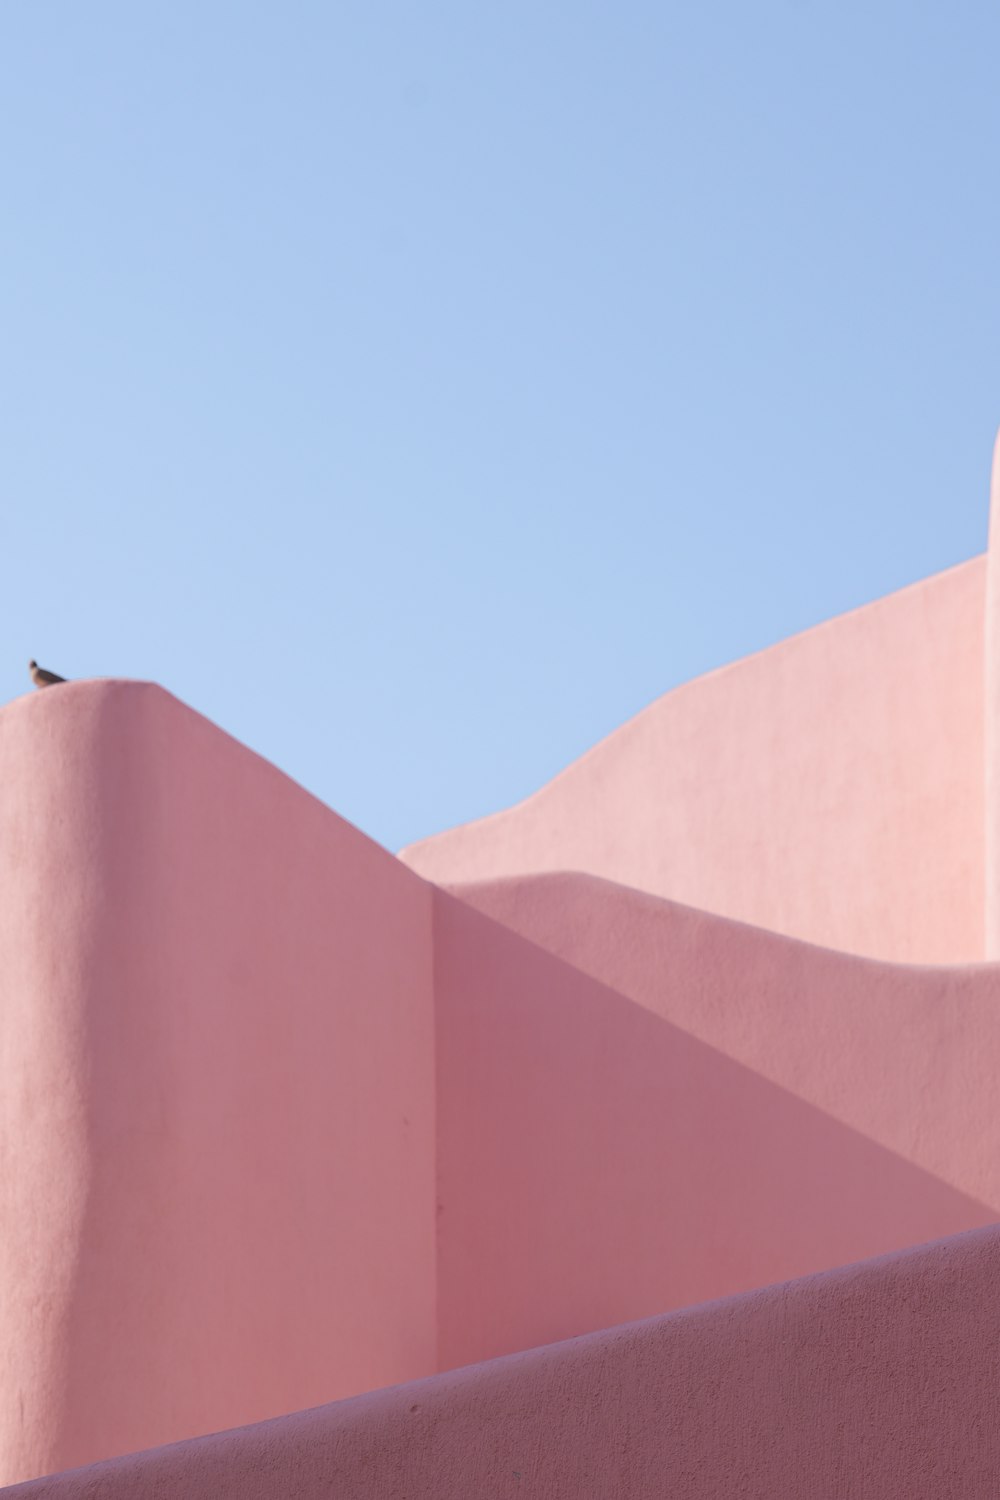 a bird is perched on top of a pink building